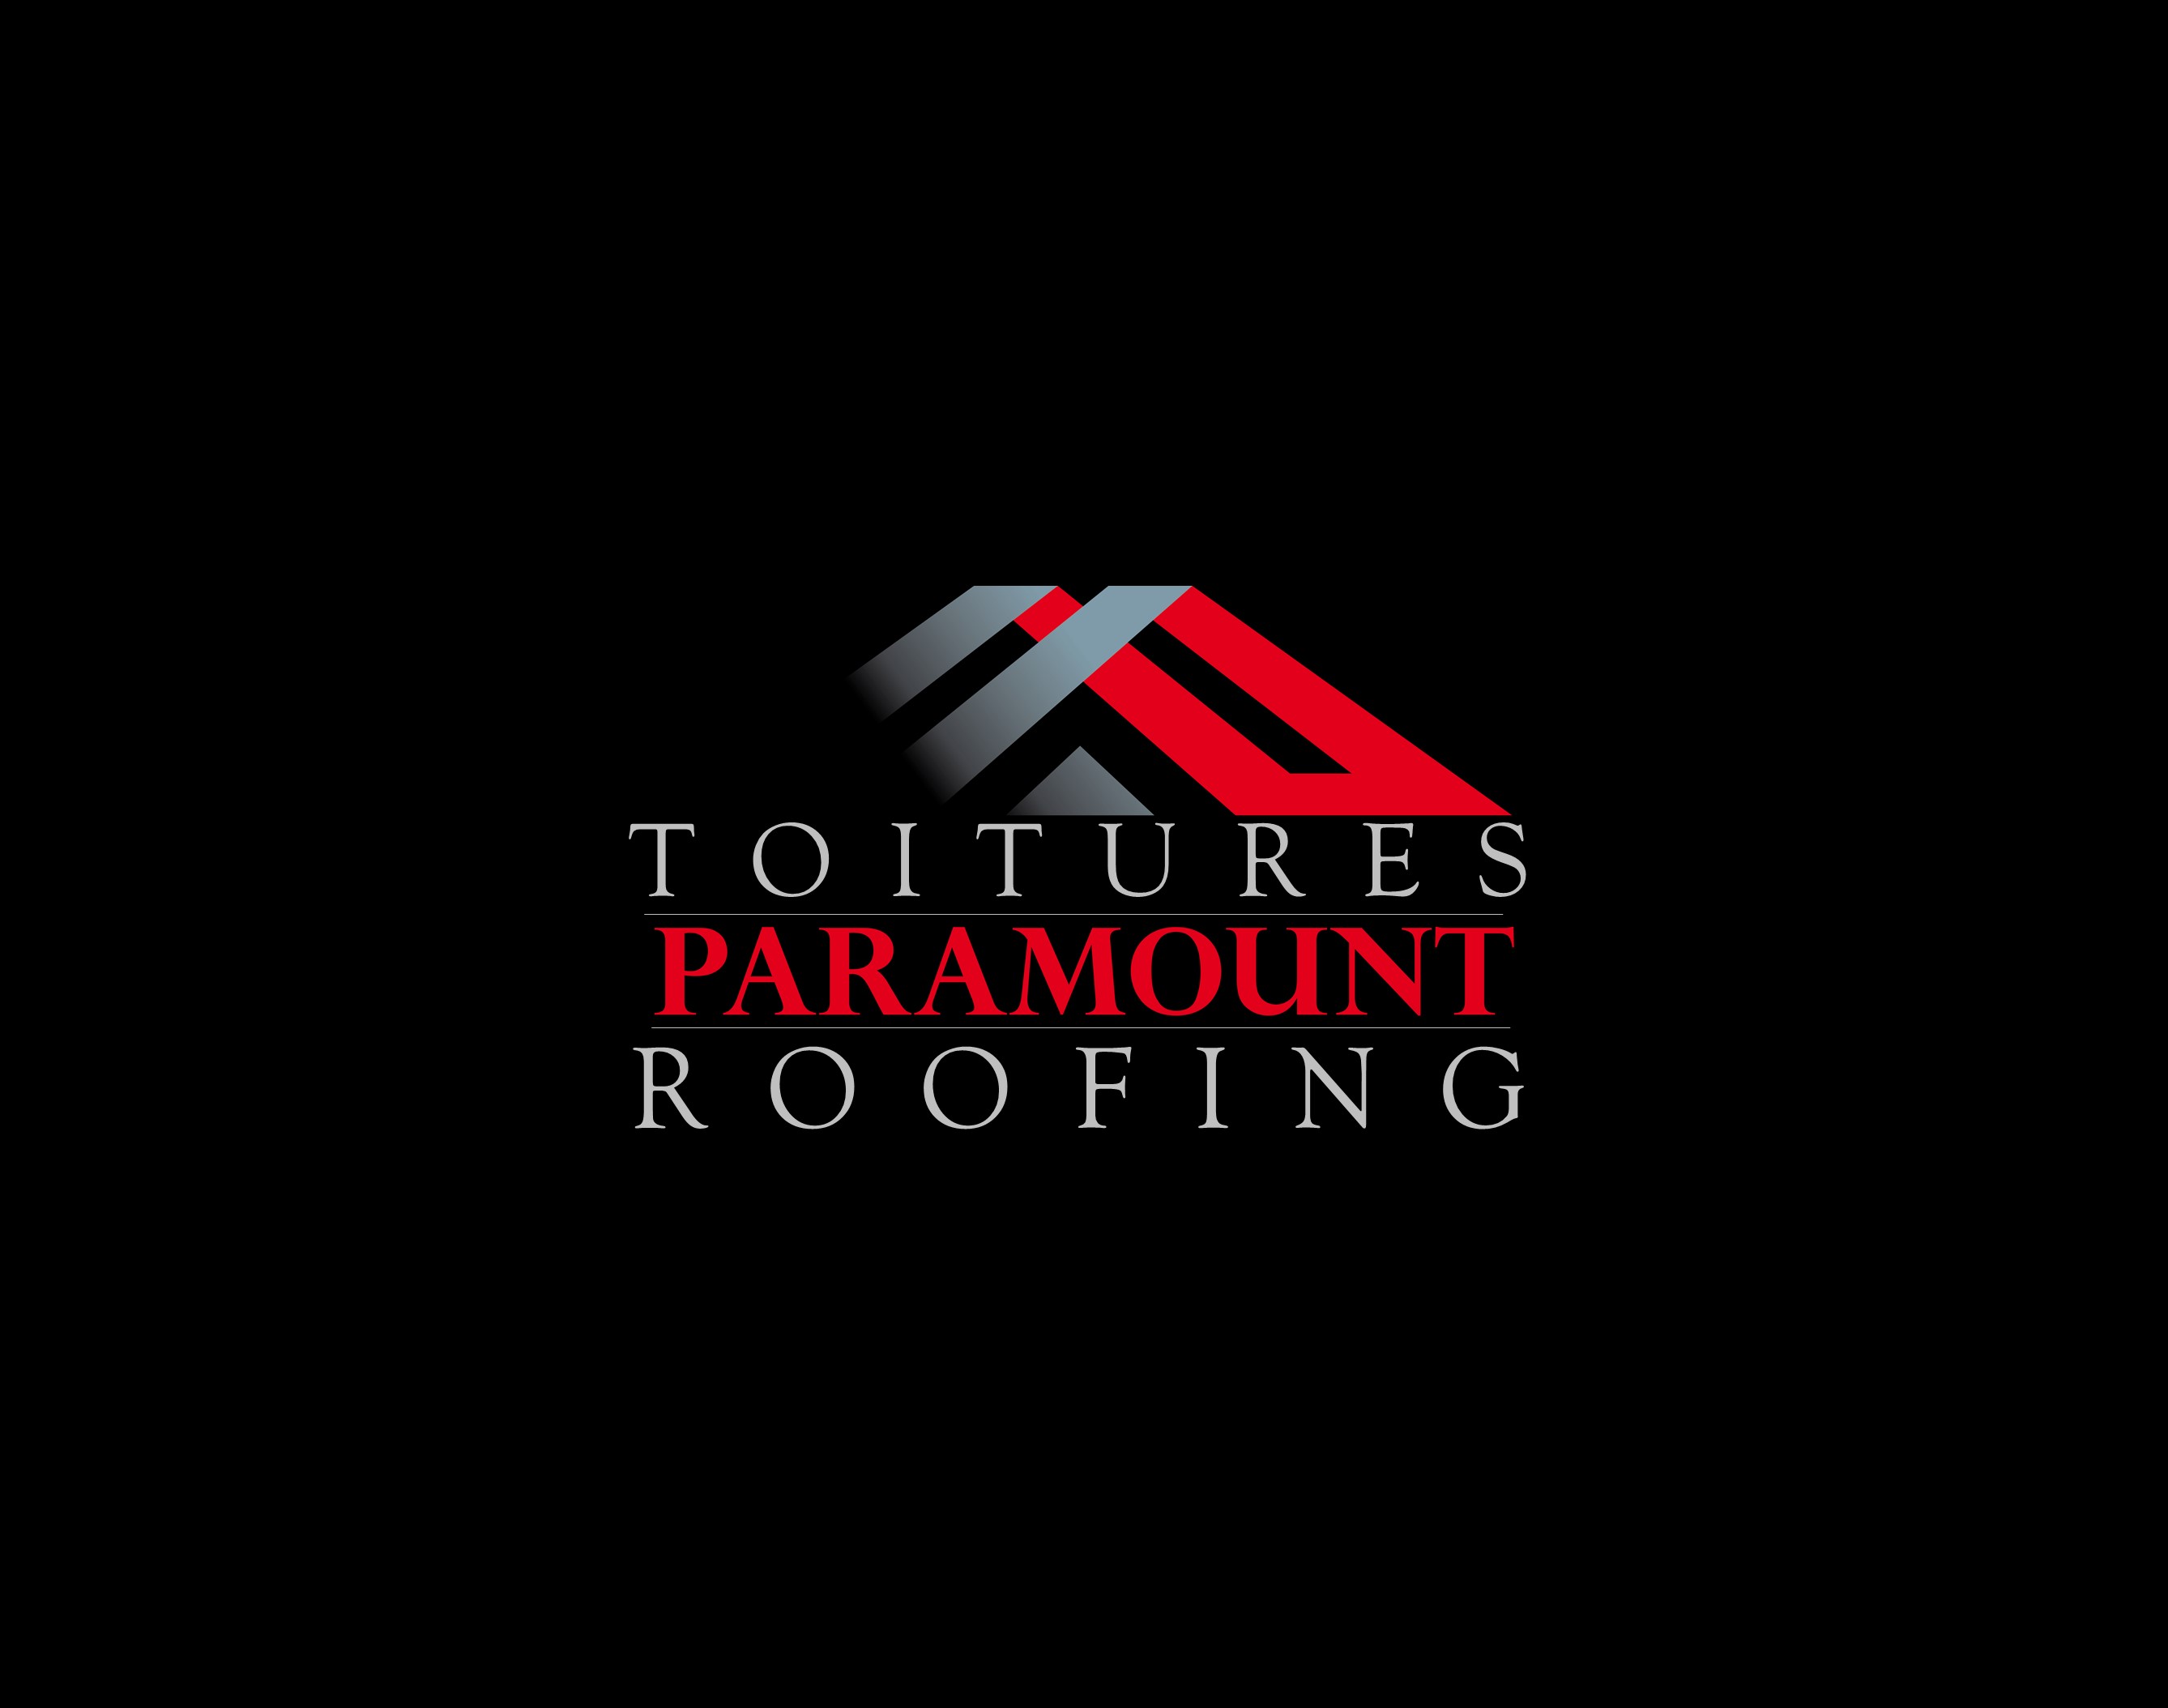 Toitures Paramount Roofing